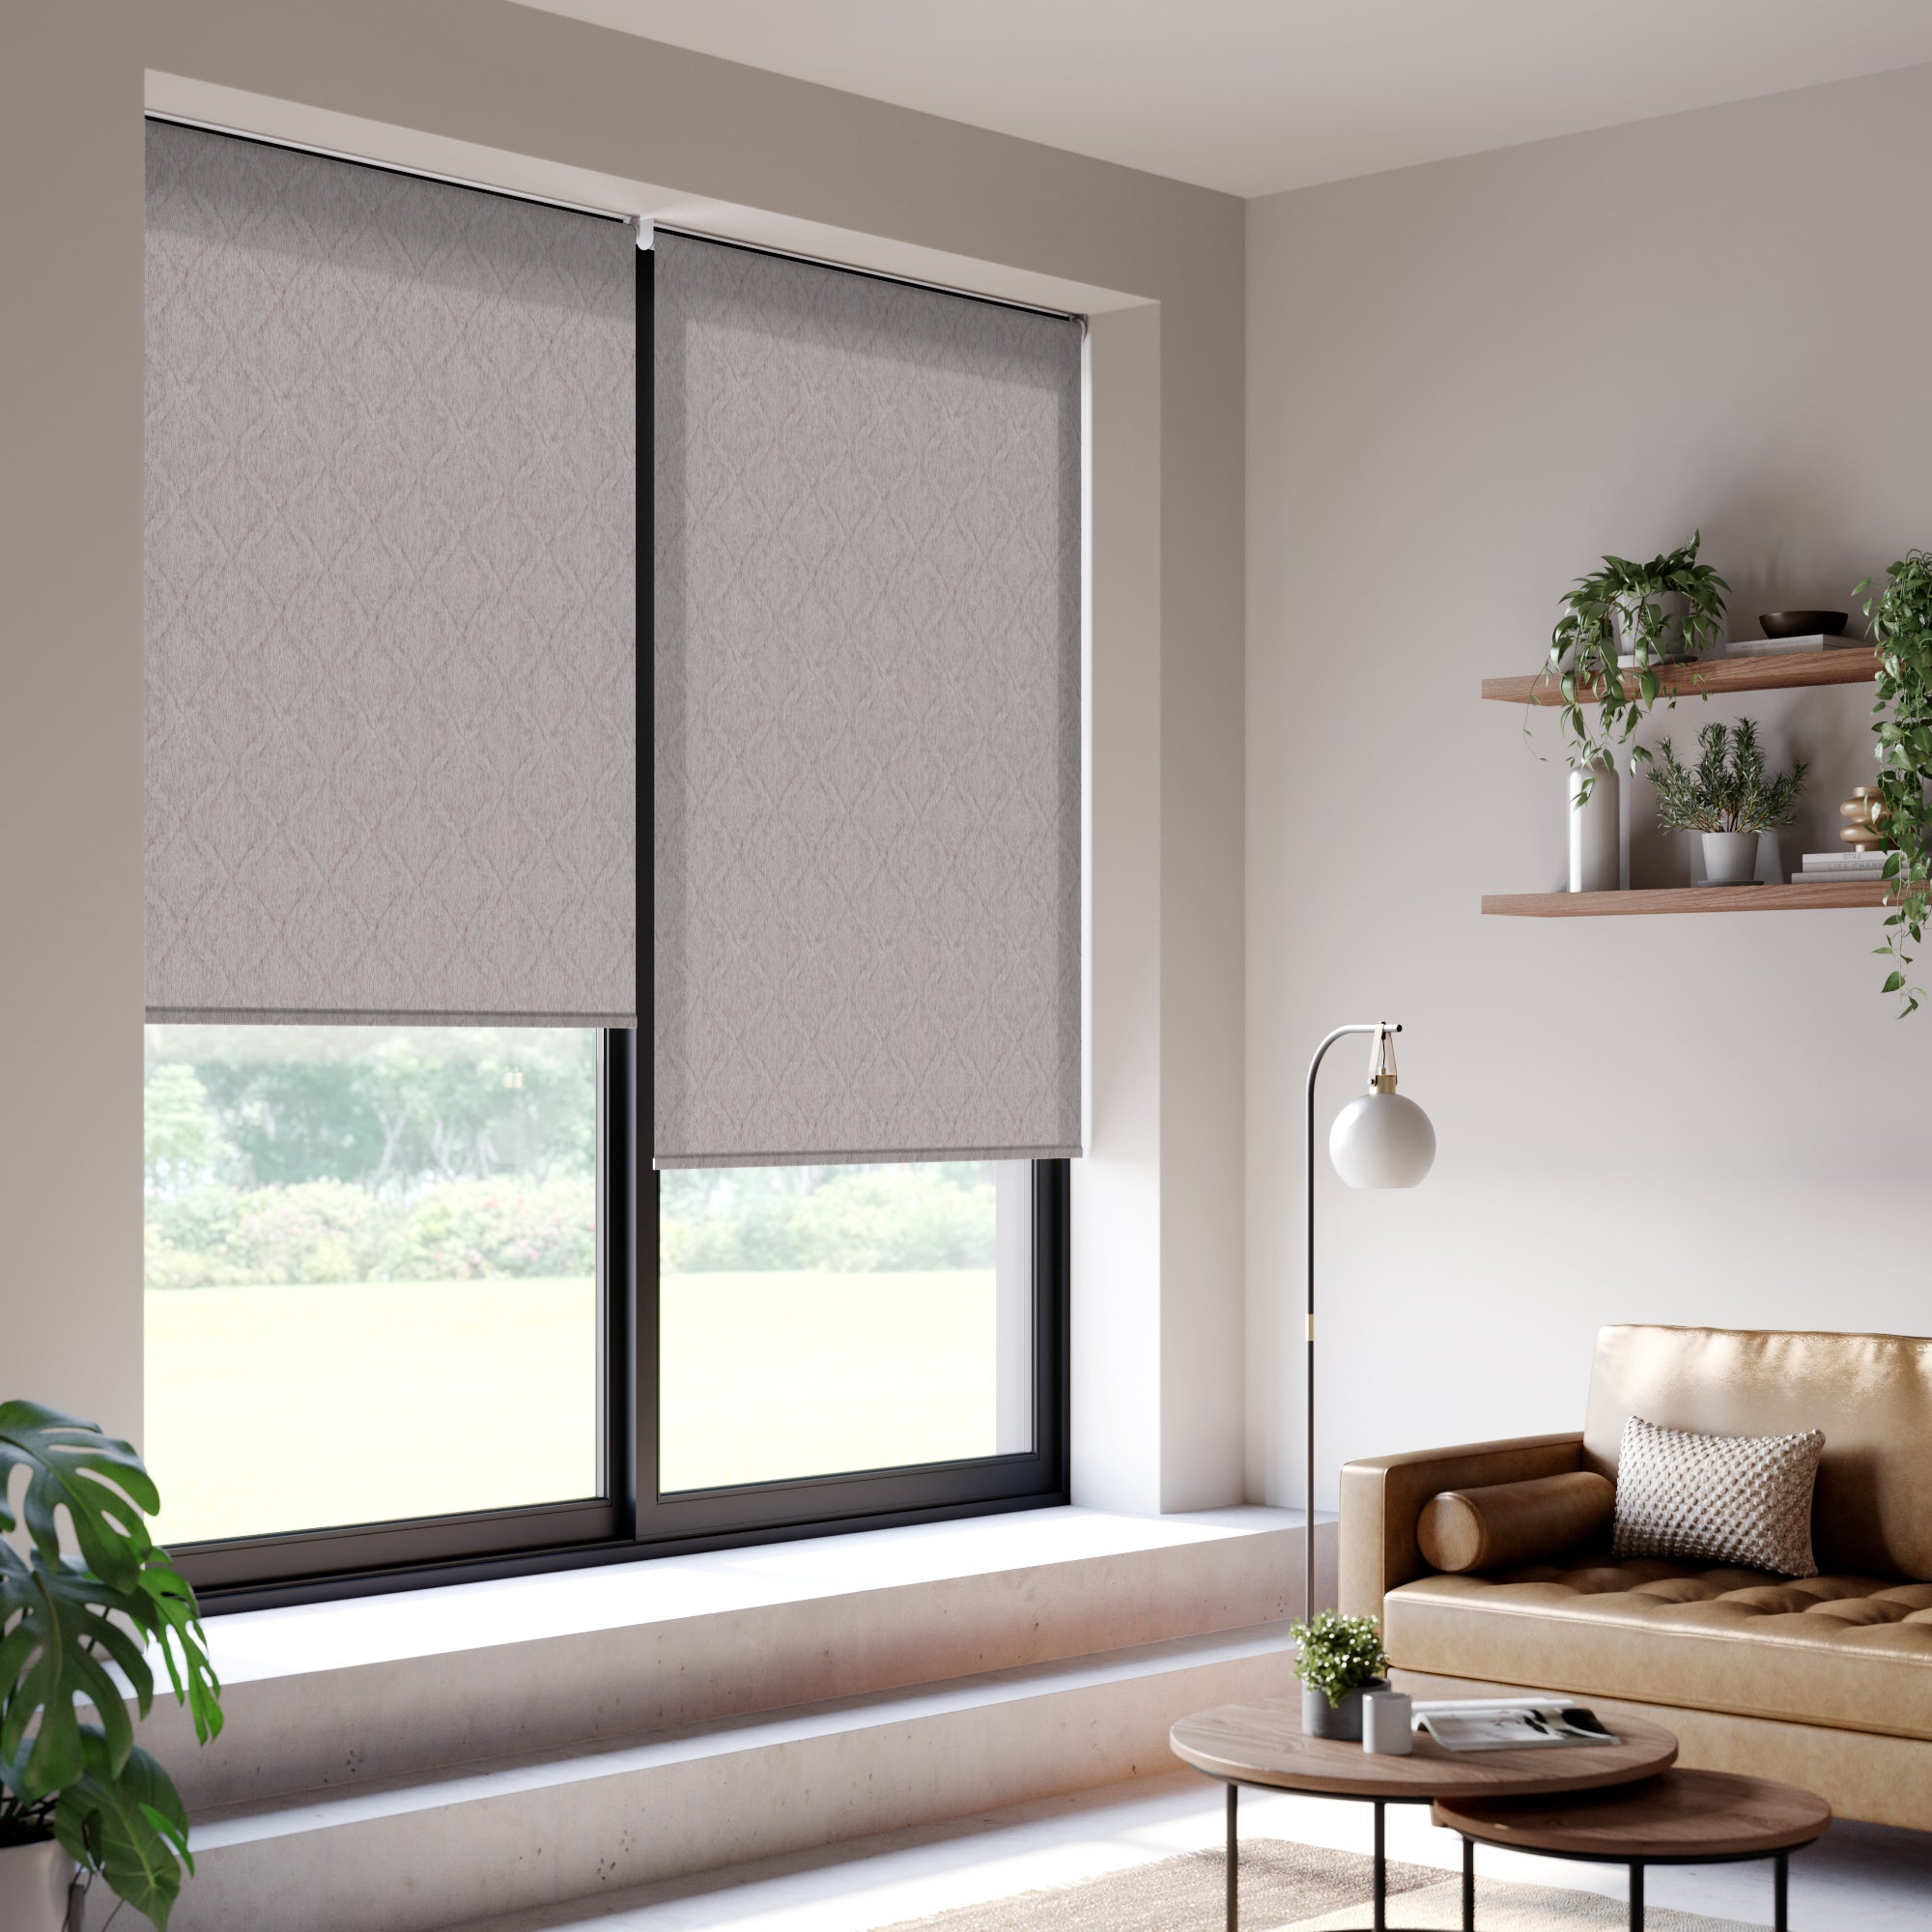 Persia Daylight Made to Measure Roller Blind Persia Silver